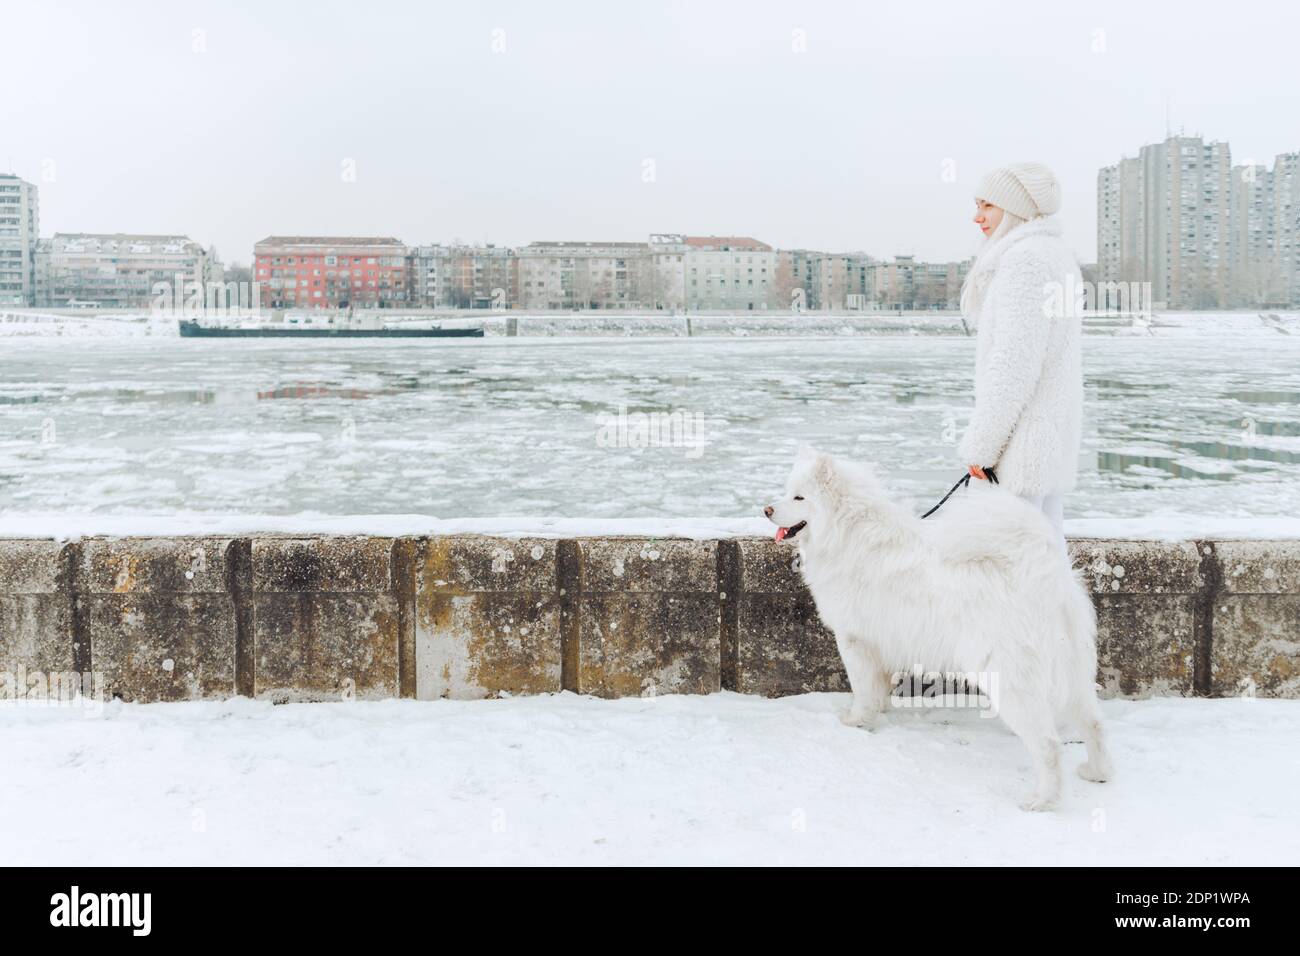 Serbia, Petrovaradin, white dressed young woman standing with white dog in the snow at riverside Stock Photo